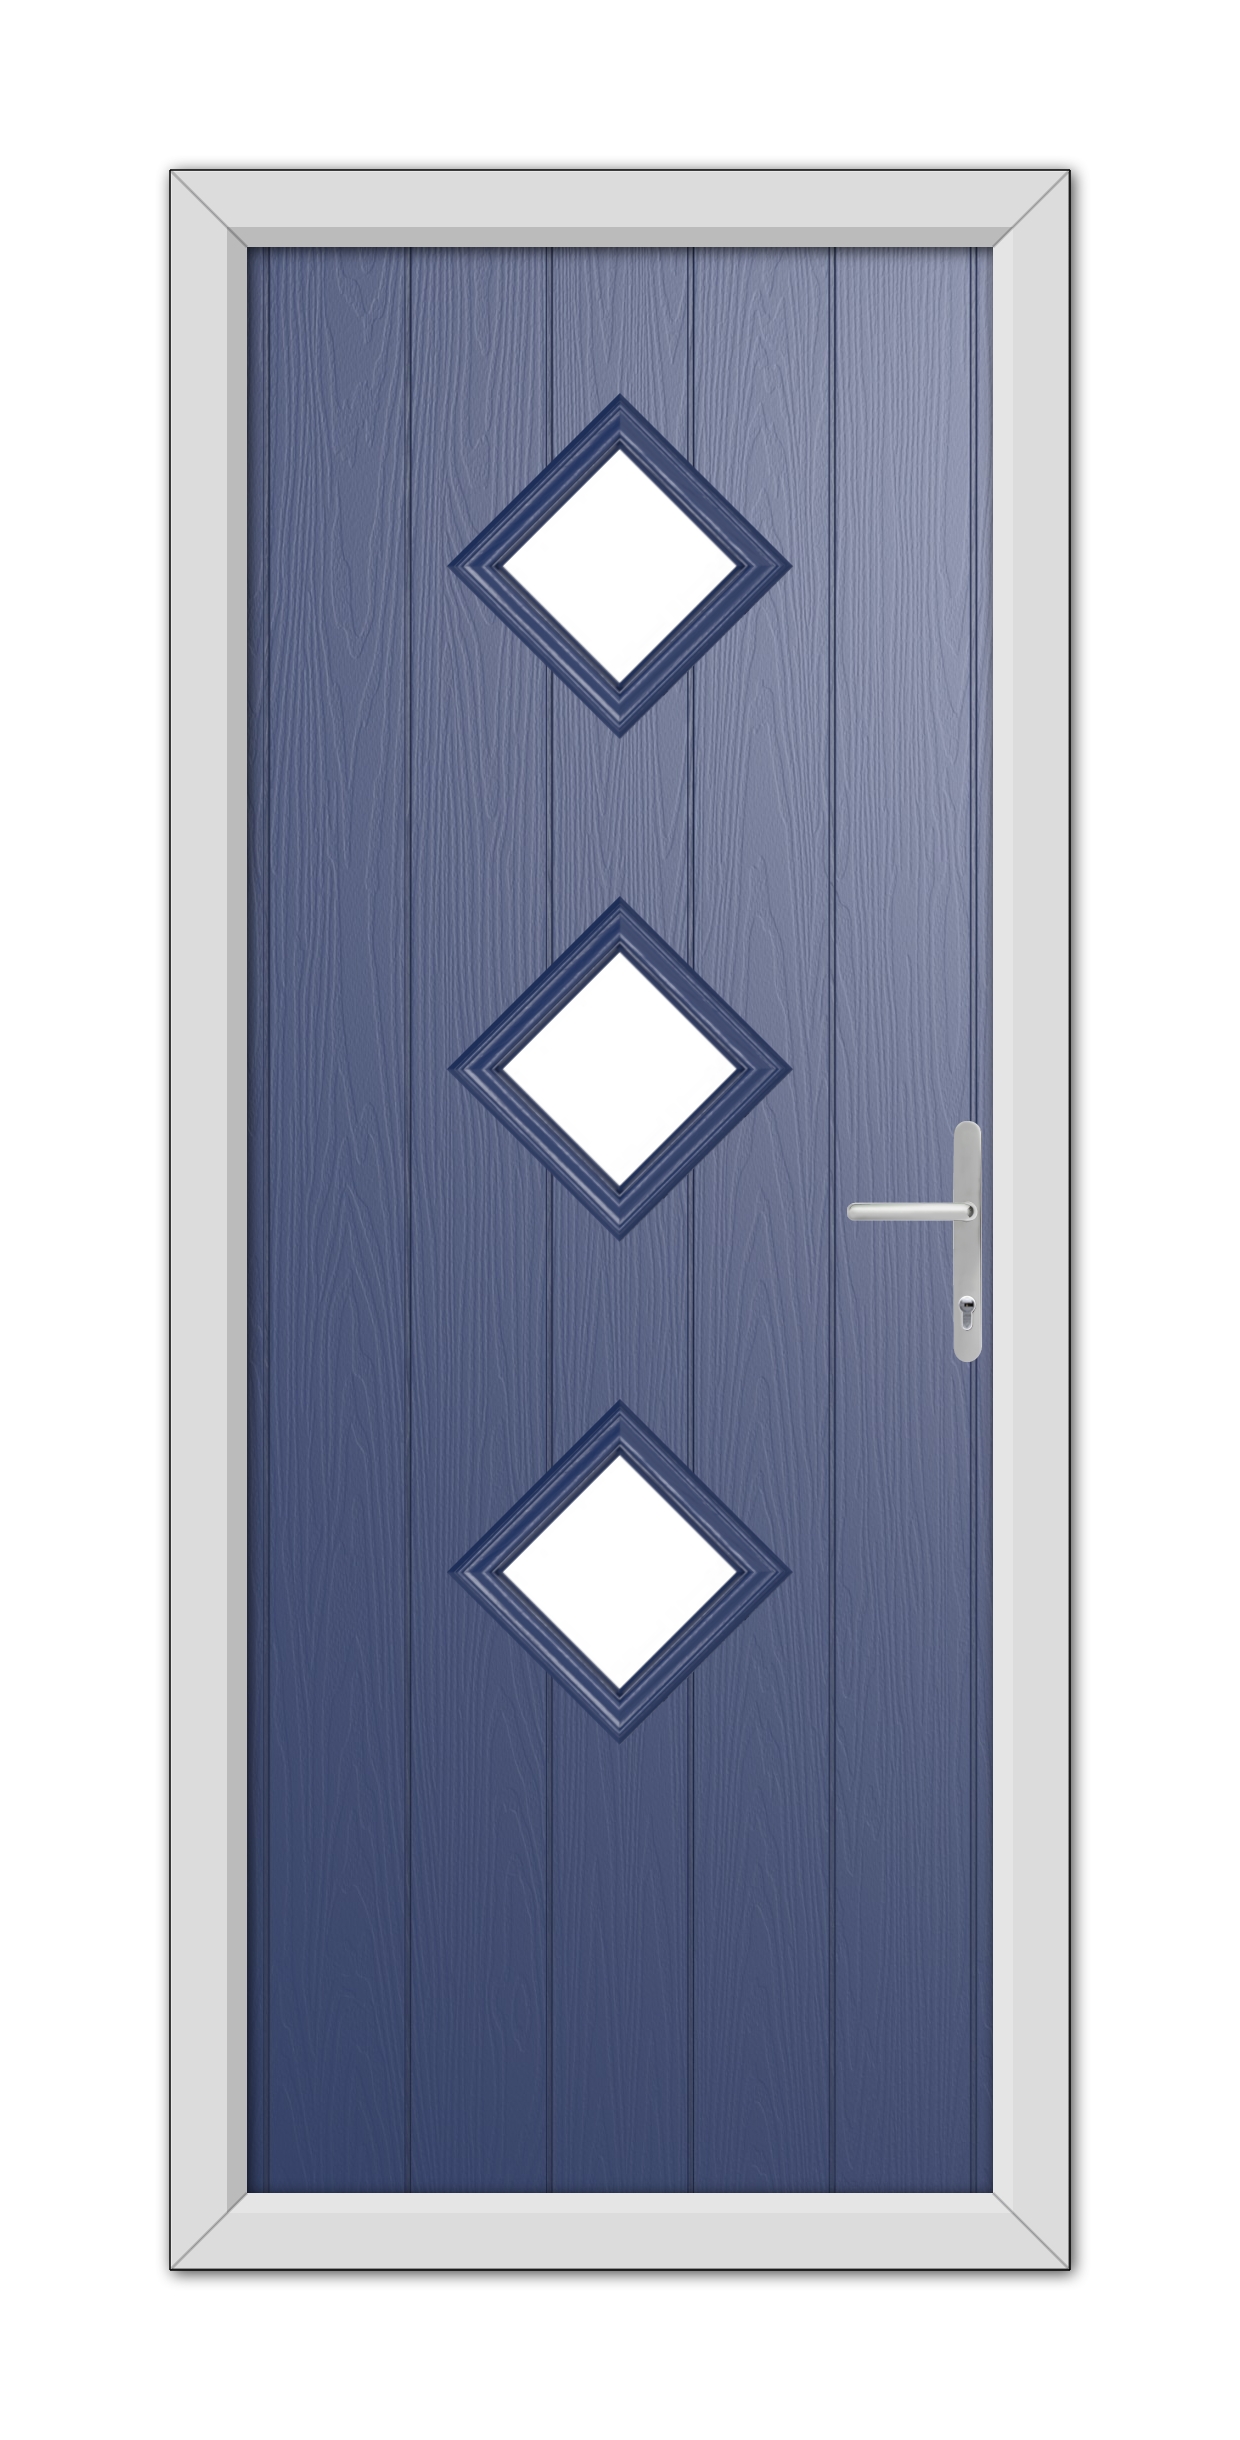 A Blue Richmond Composite Door 48mm Timber Core with three diamond-shaped windows and a silver handle, framed by a white door frame.